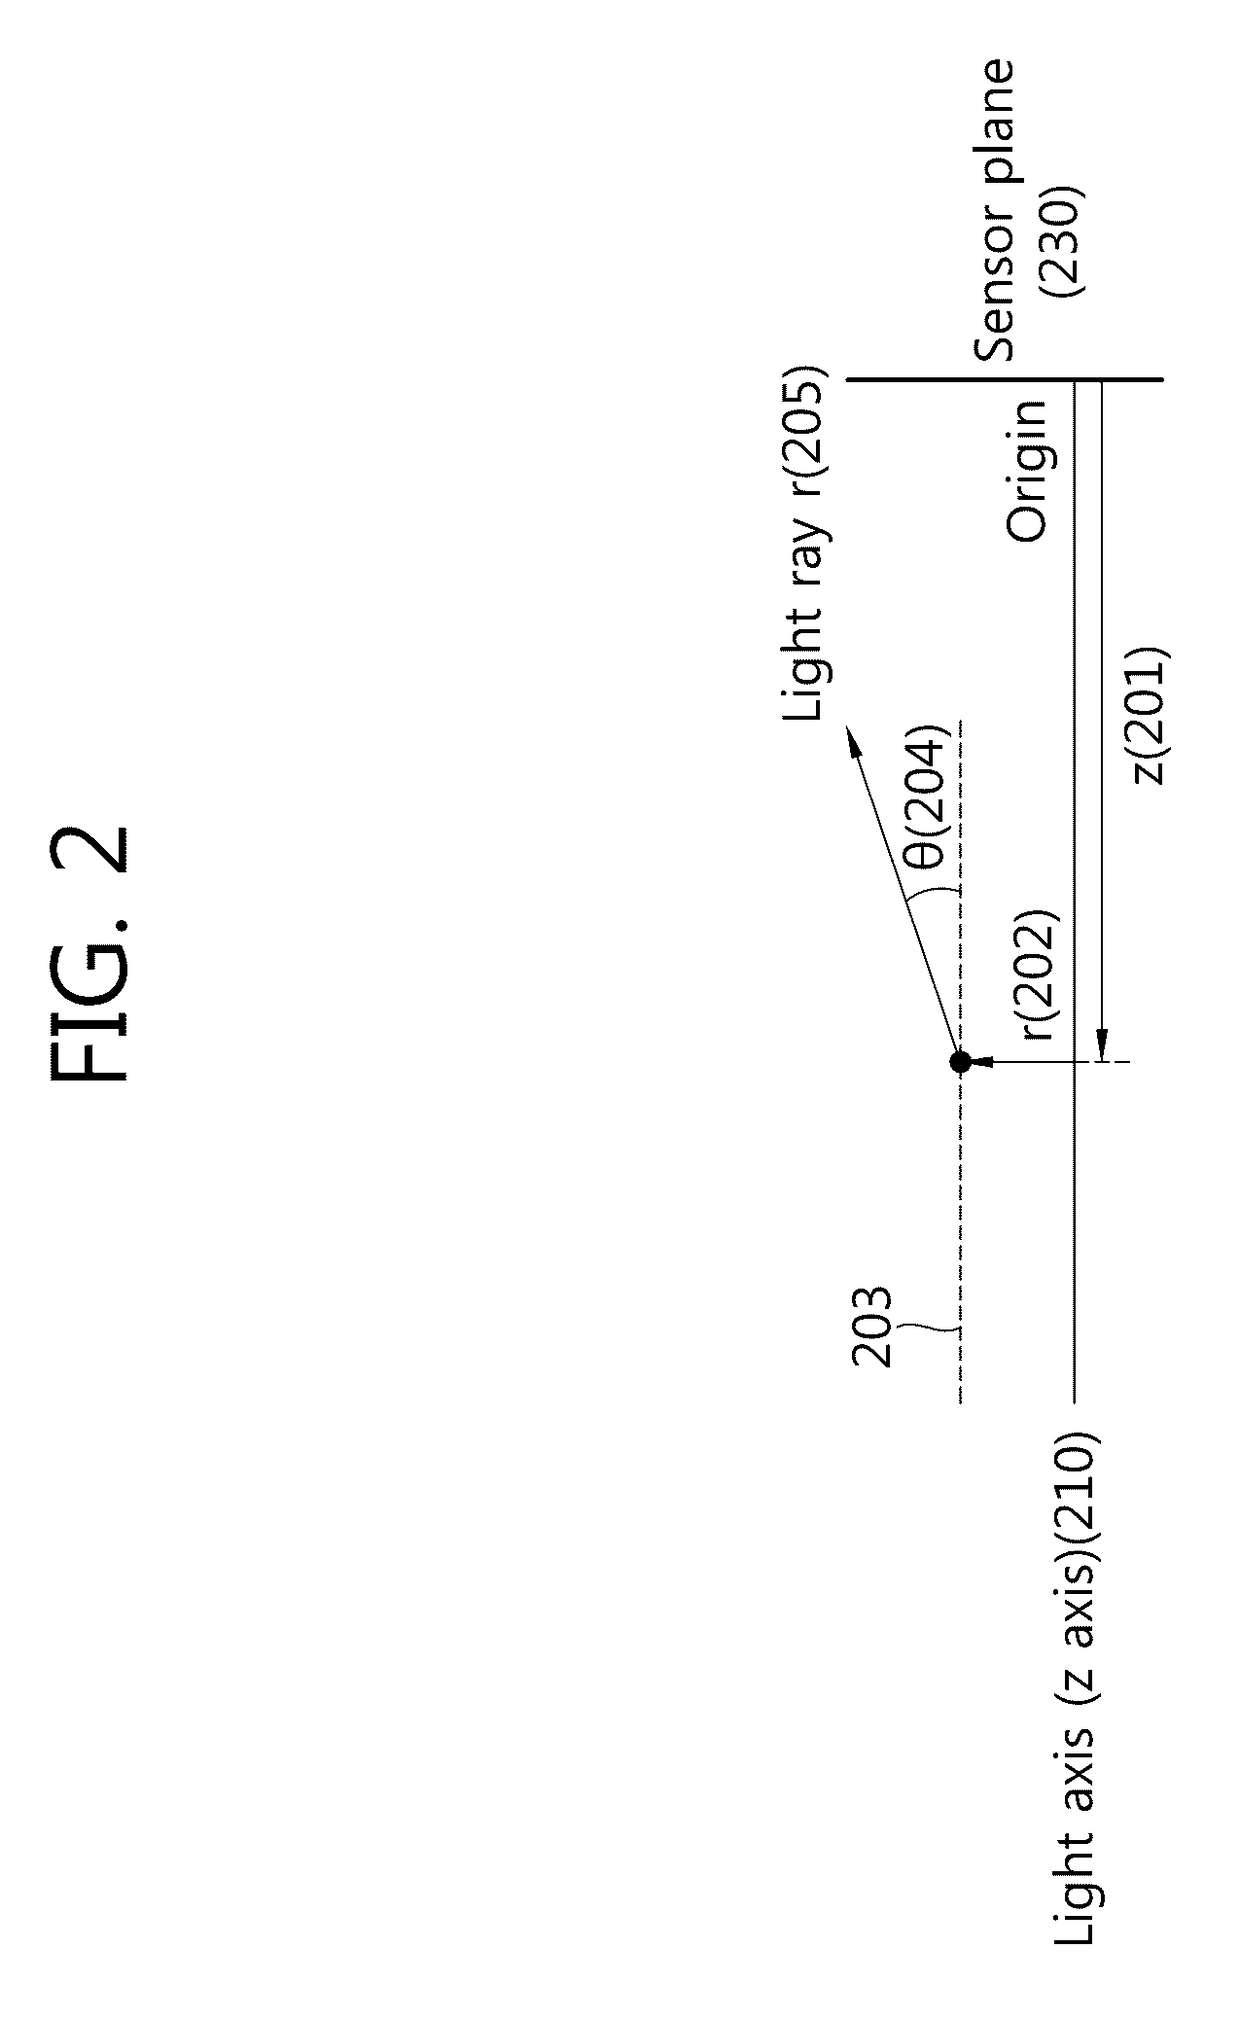 Methods and apparatuses of lens flare rendering using linear paraxial approximation, and methods and apparatuses of lens flare rendering based on blending